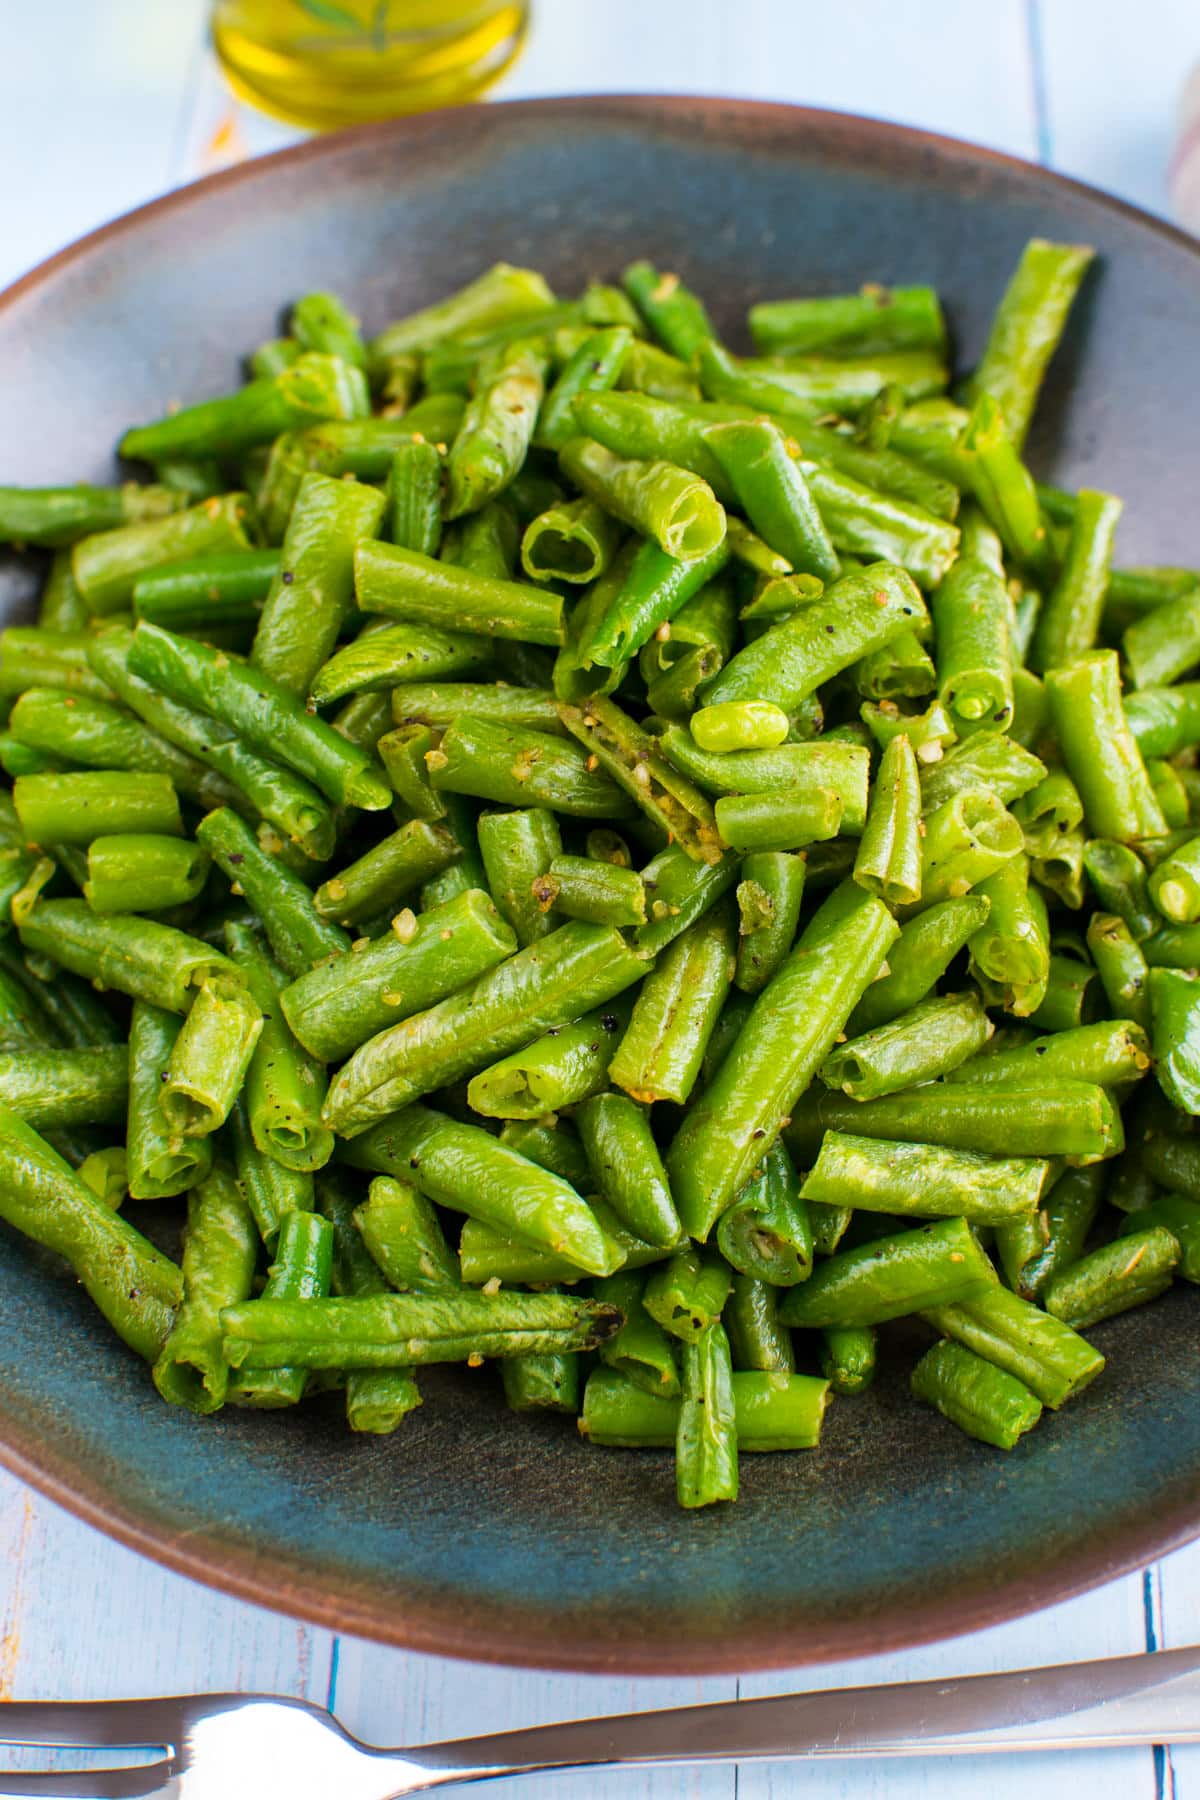 Plate with green beans cooked in the air fryer on a wooden table.